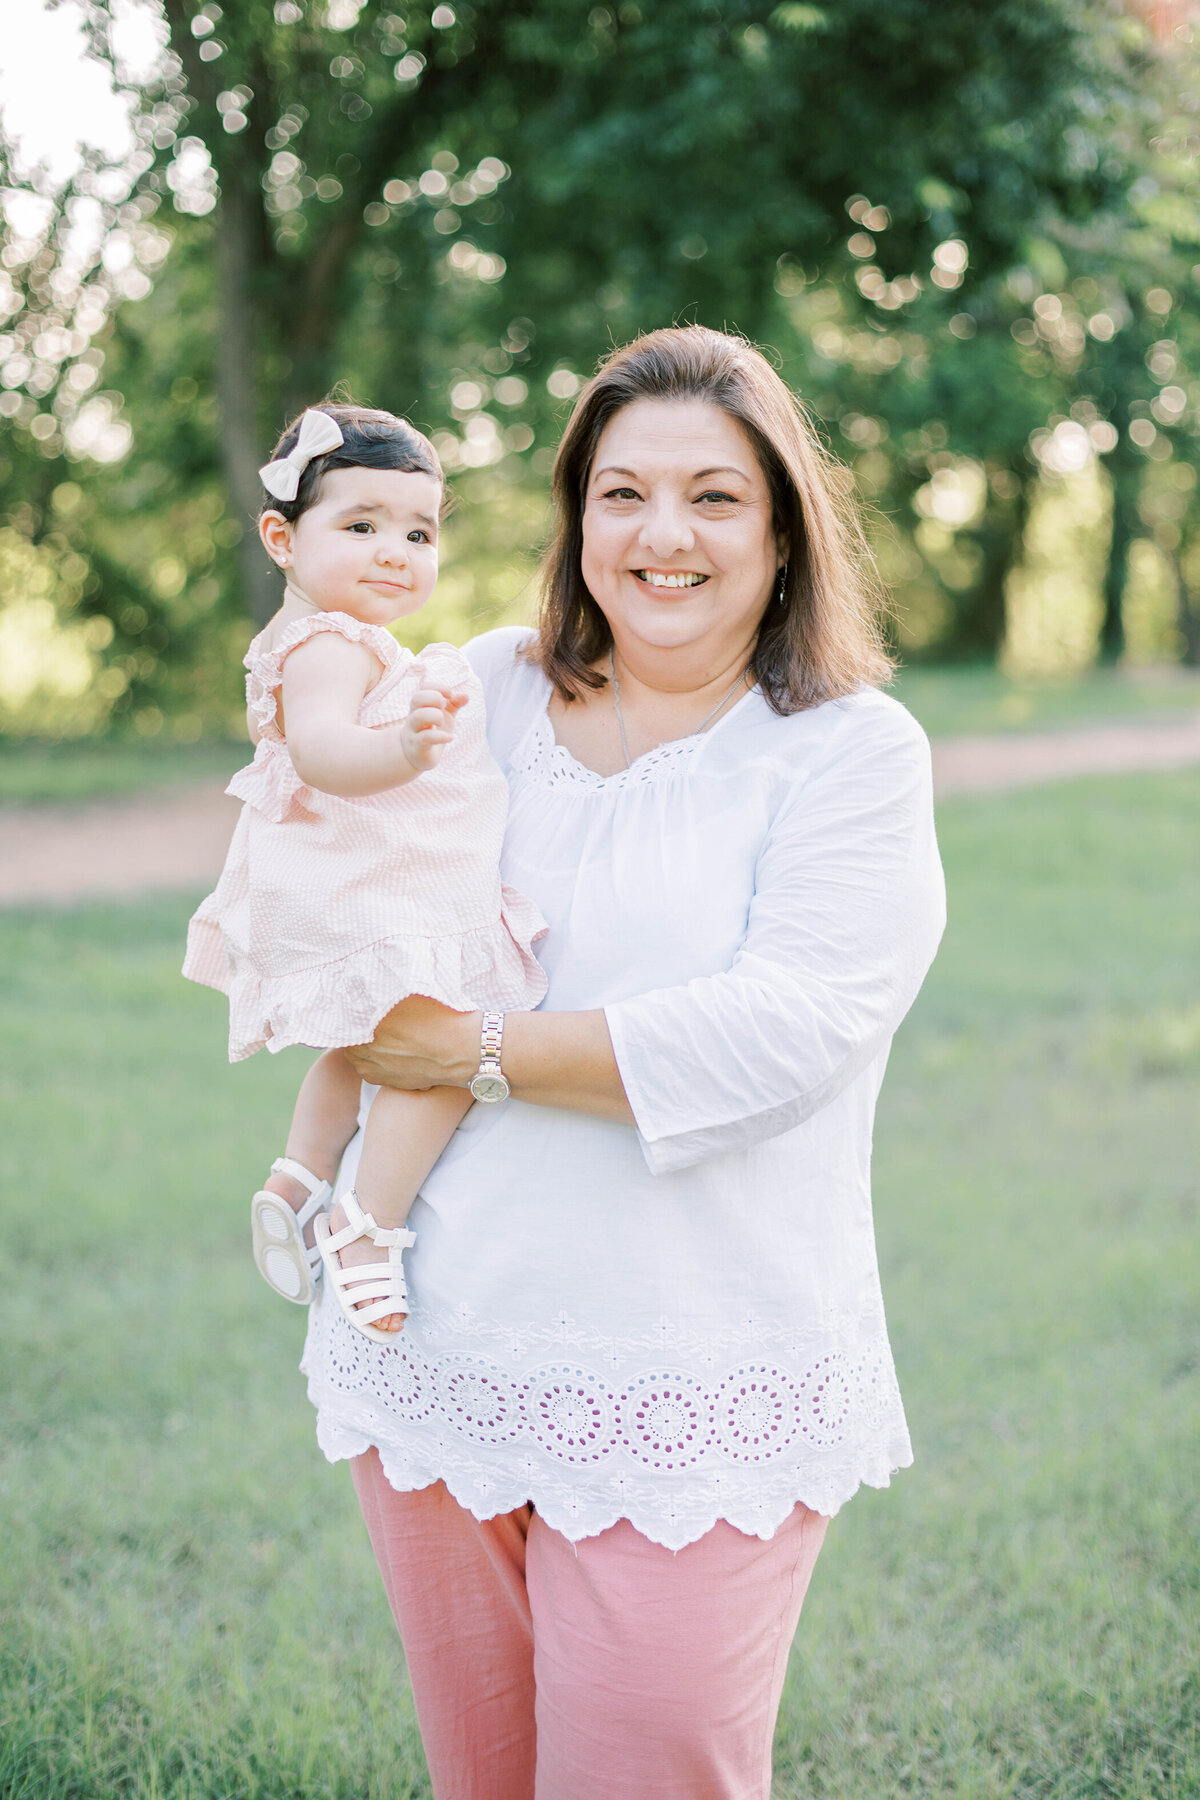 Ink & Willow Photography - Family Photography Victoria TX - Garcia Family - ink&willow-garcia2021-62